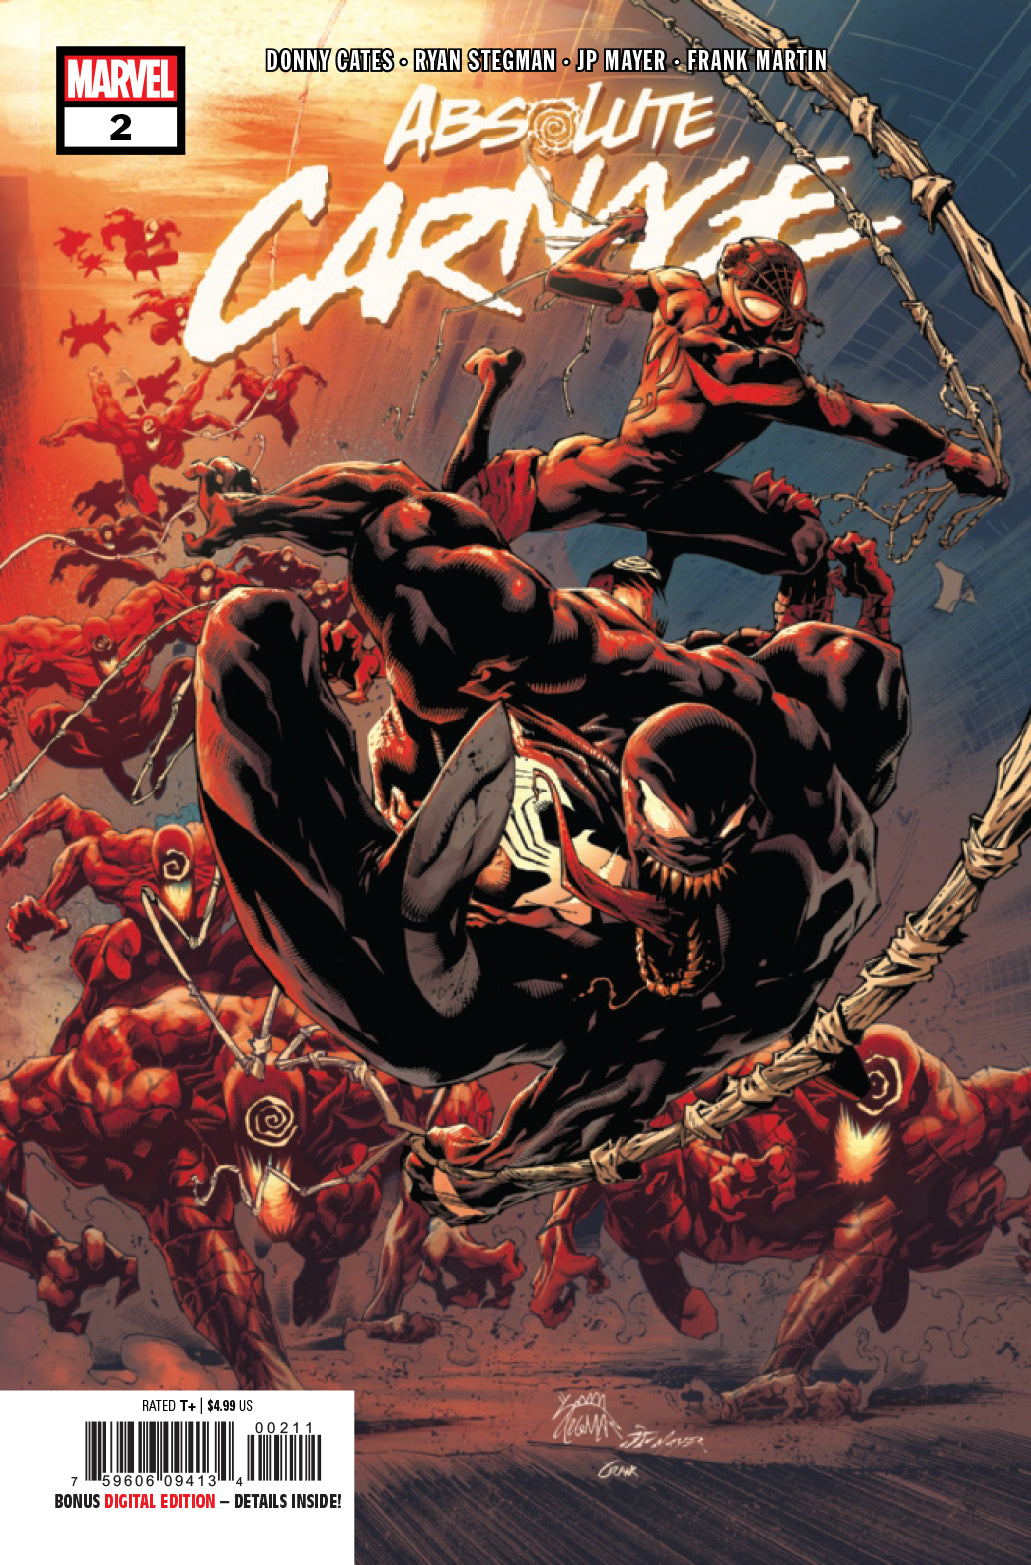 ABSOLUTE CARNAGE #2 (OF 5)